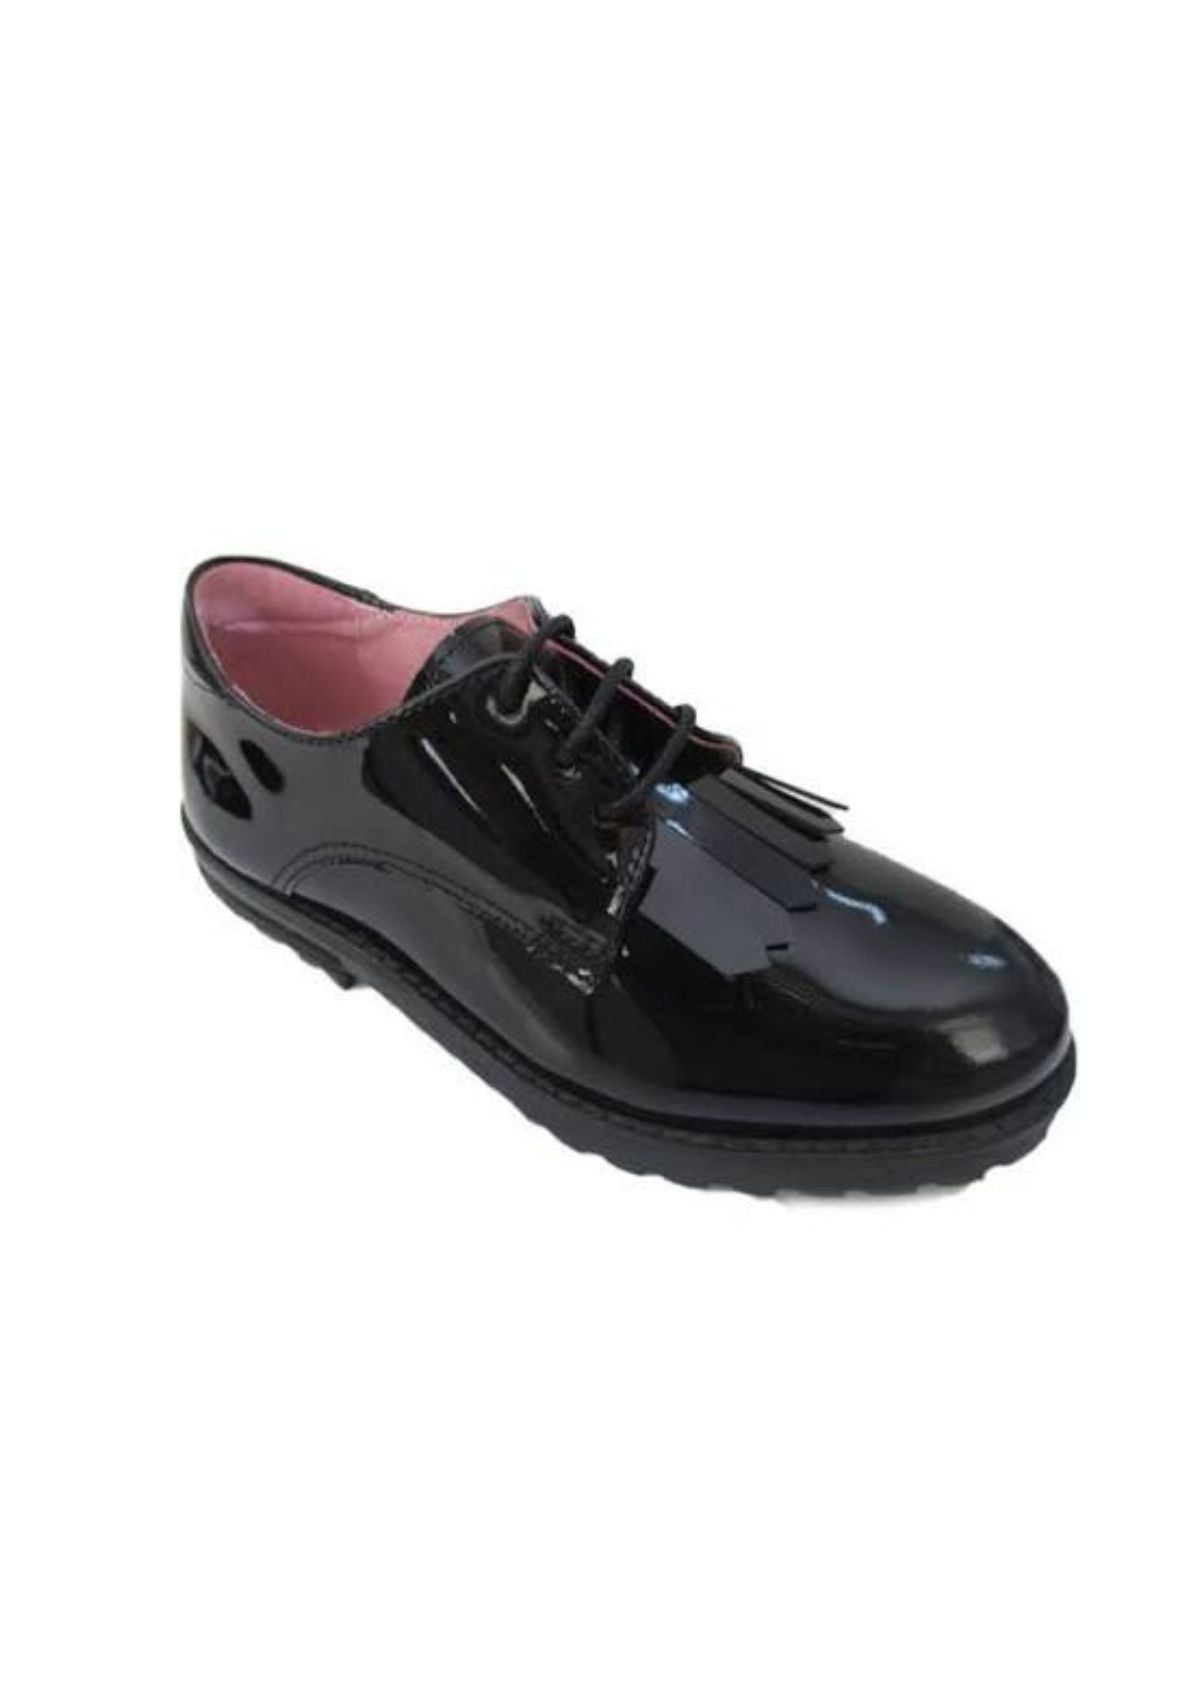 Petasil Girls School Shoes | Tracey | Black Patent  side